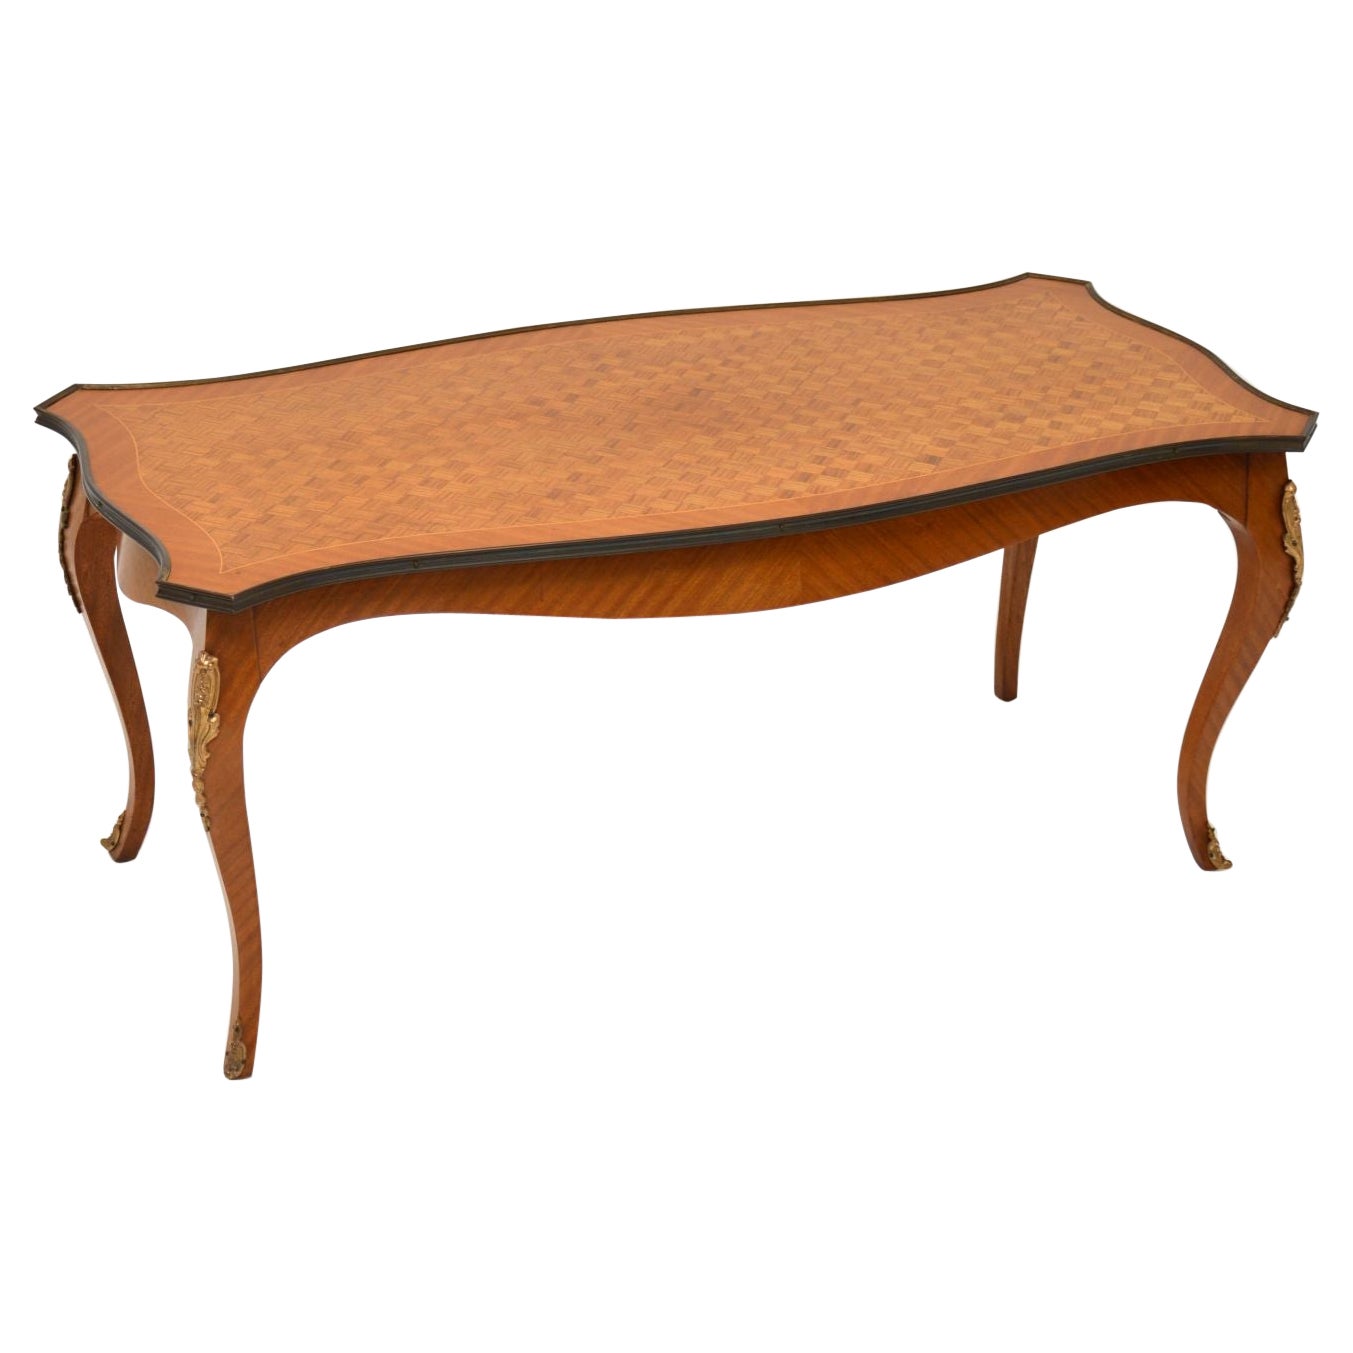 Antique French Inlaid Parquetry Coffee Table